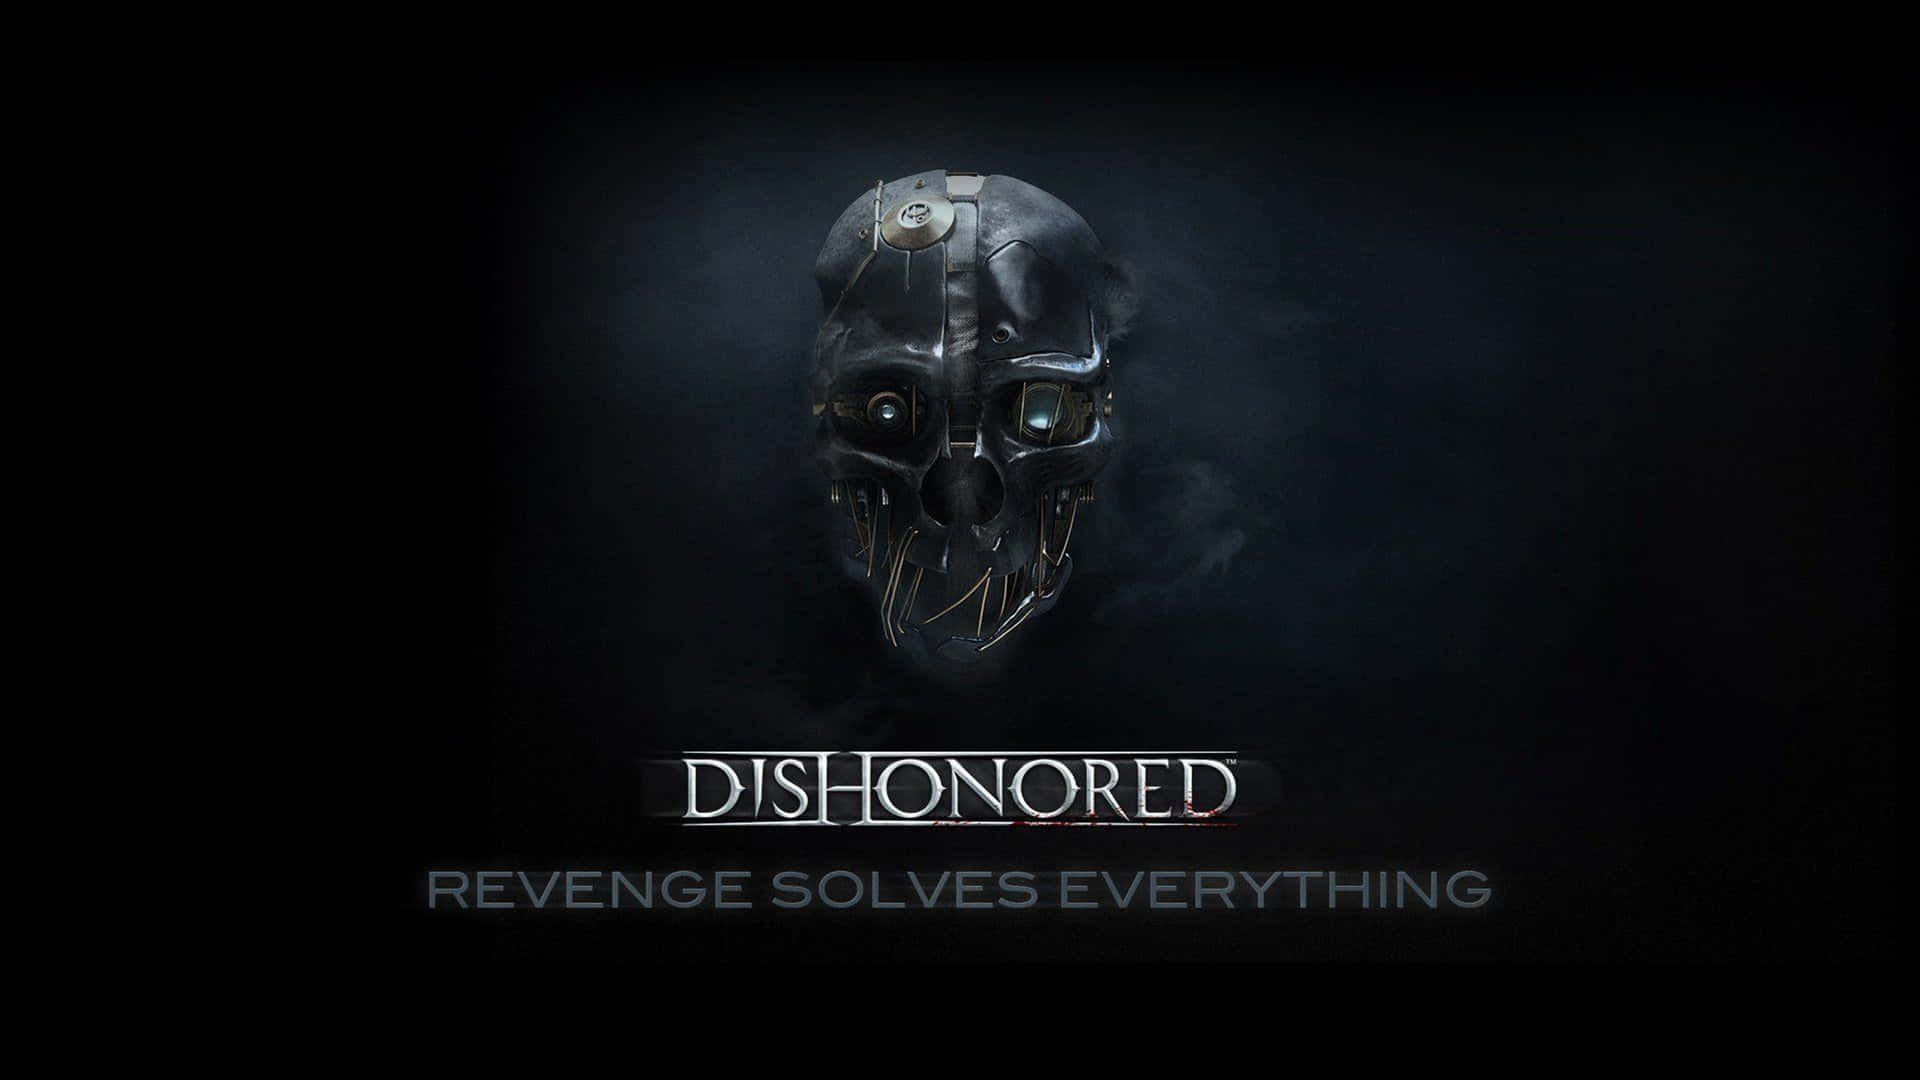 Episode 2 of "Dishonored" - Vengeance is coming Wallpaper